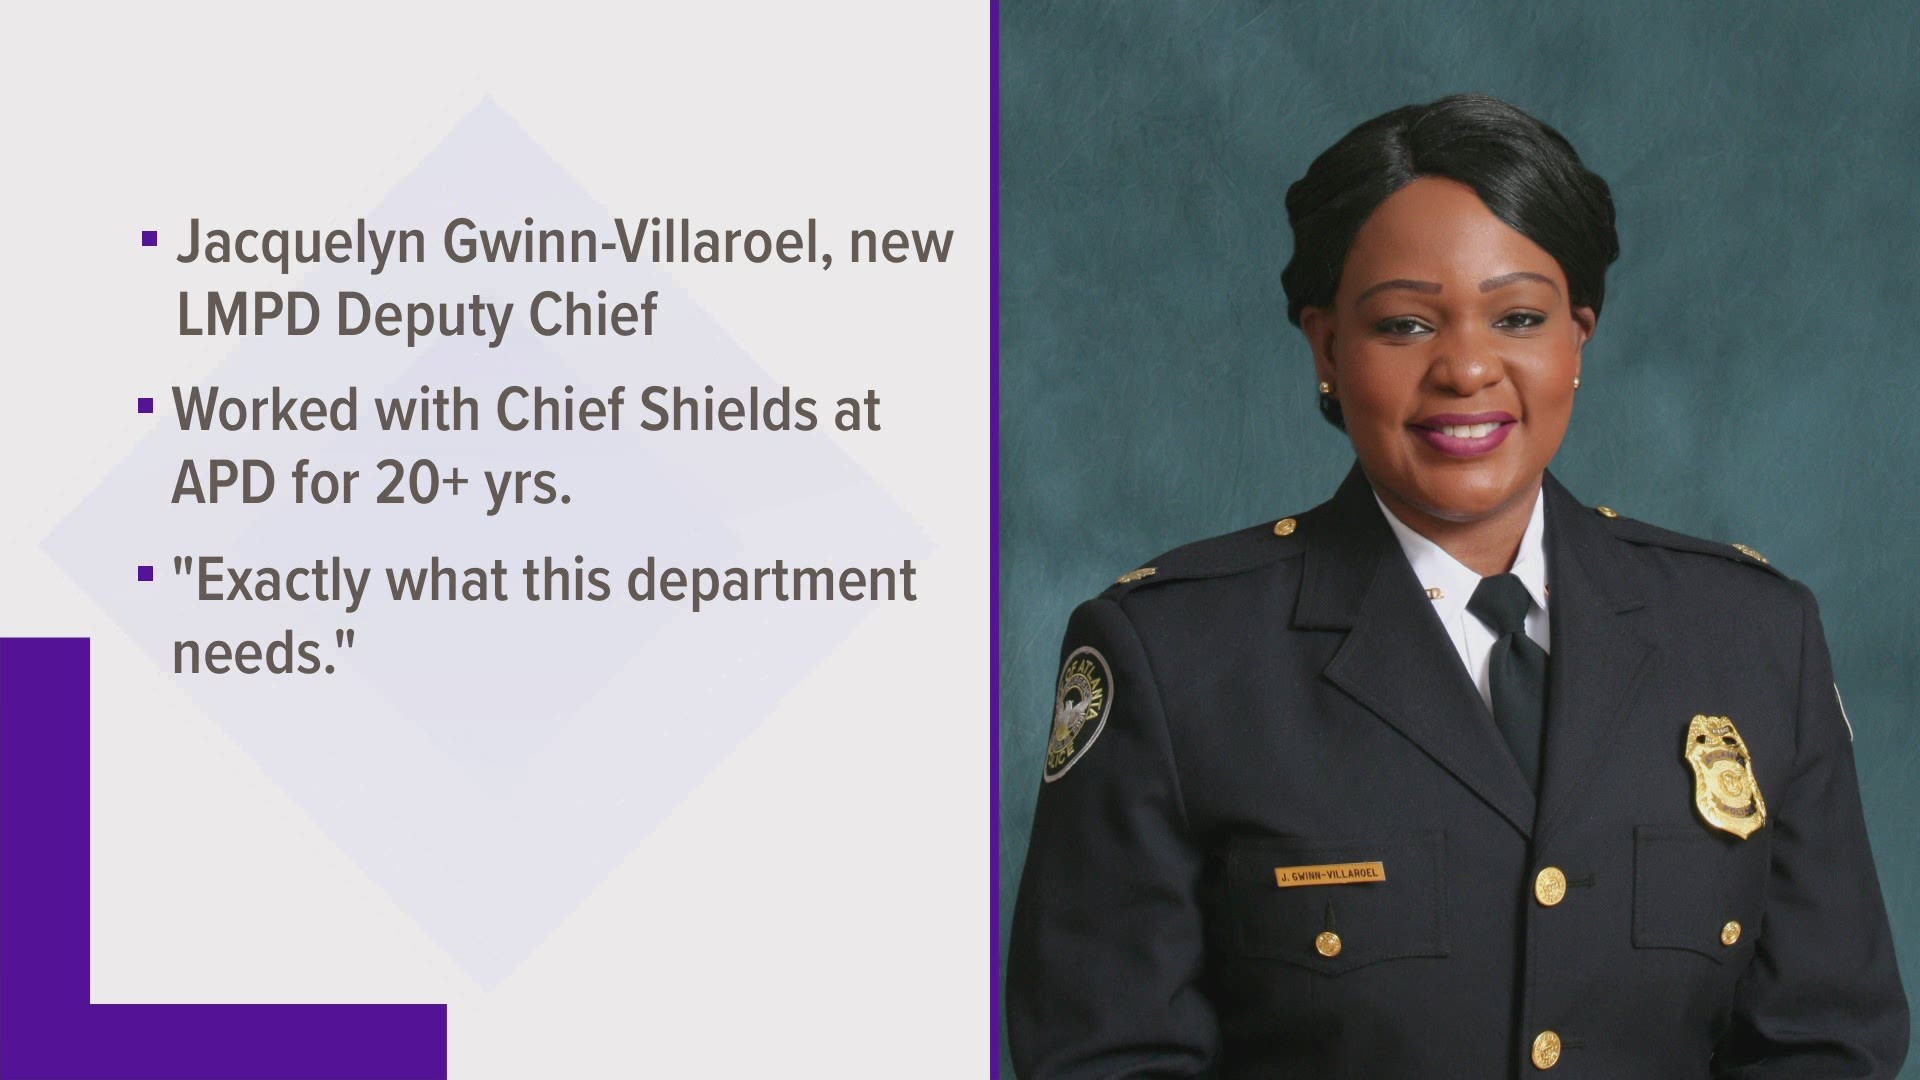 Chief Erika Shields has named Jacquelyn Gwinn-Villaroel as the new LMPD deputy chief. Shields worked with her in Atlanta for more than 20 years.